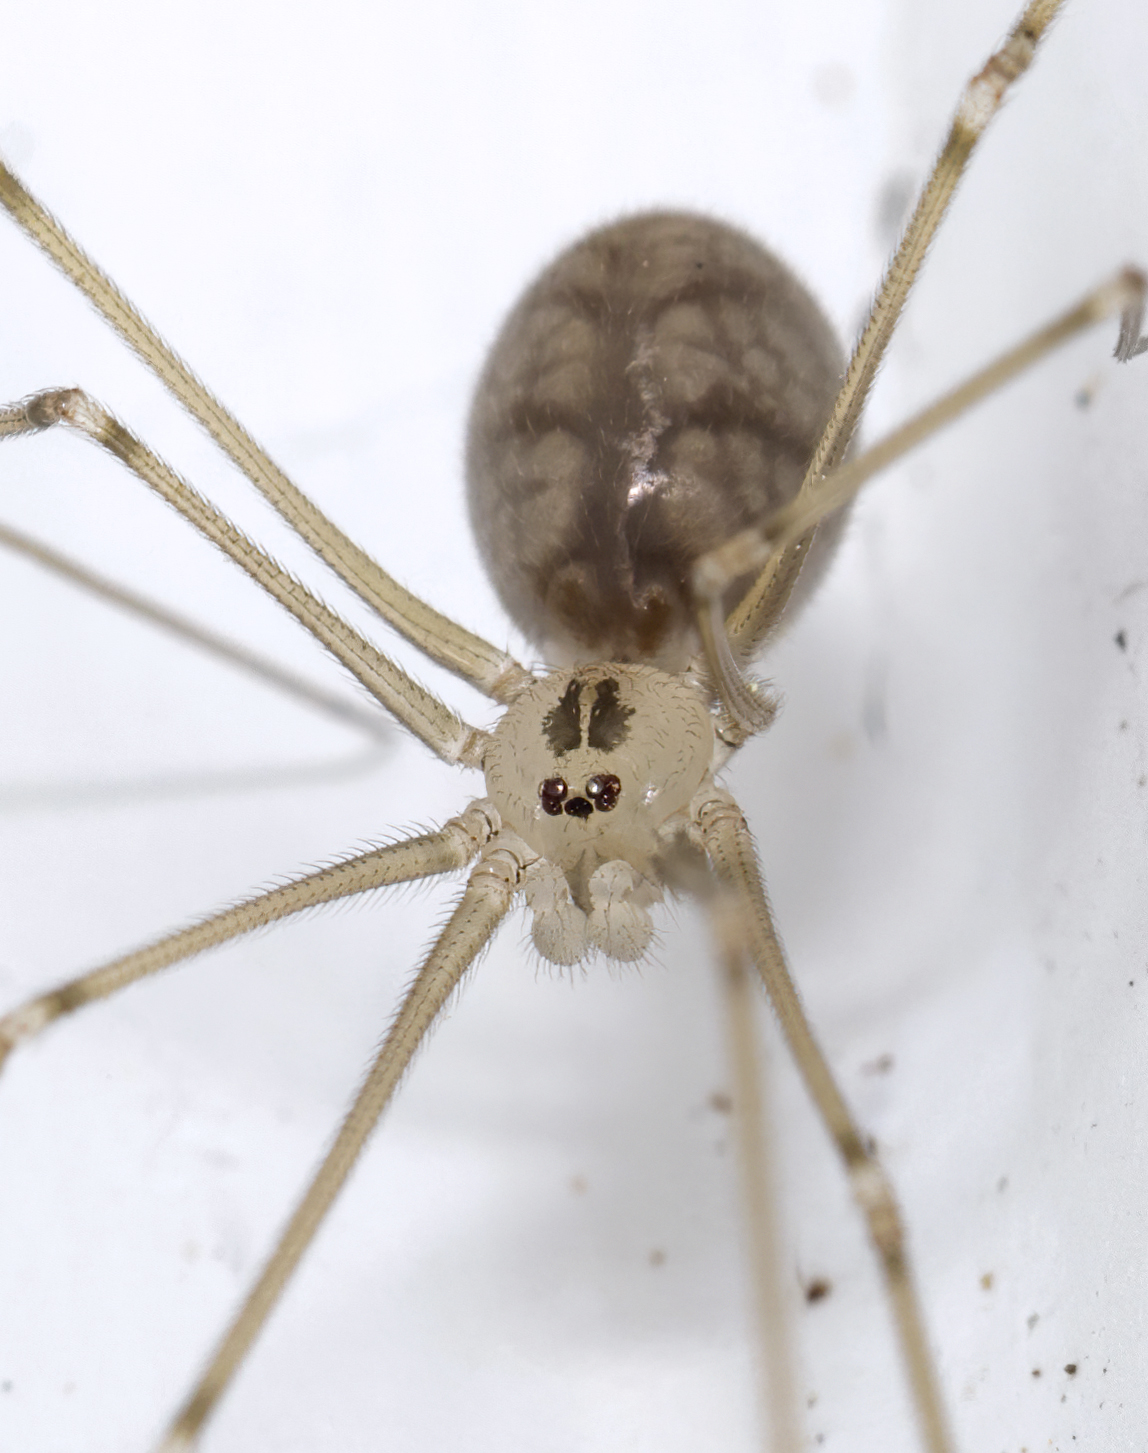 Long-bodied cellar daddy long-legs spider